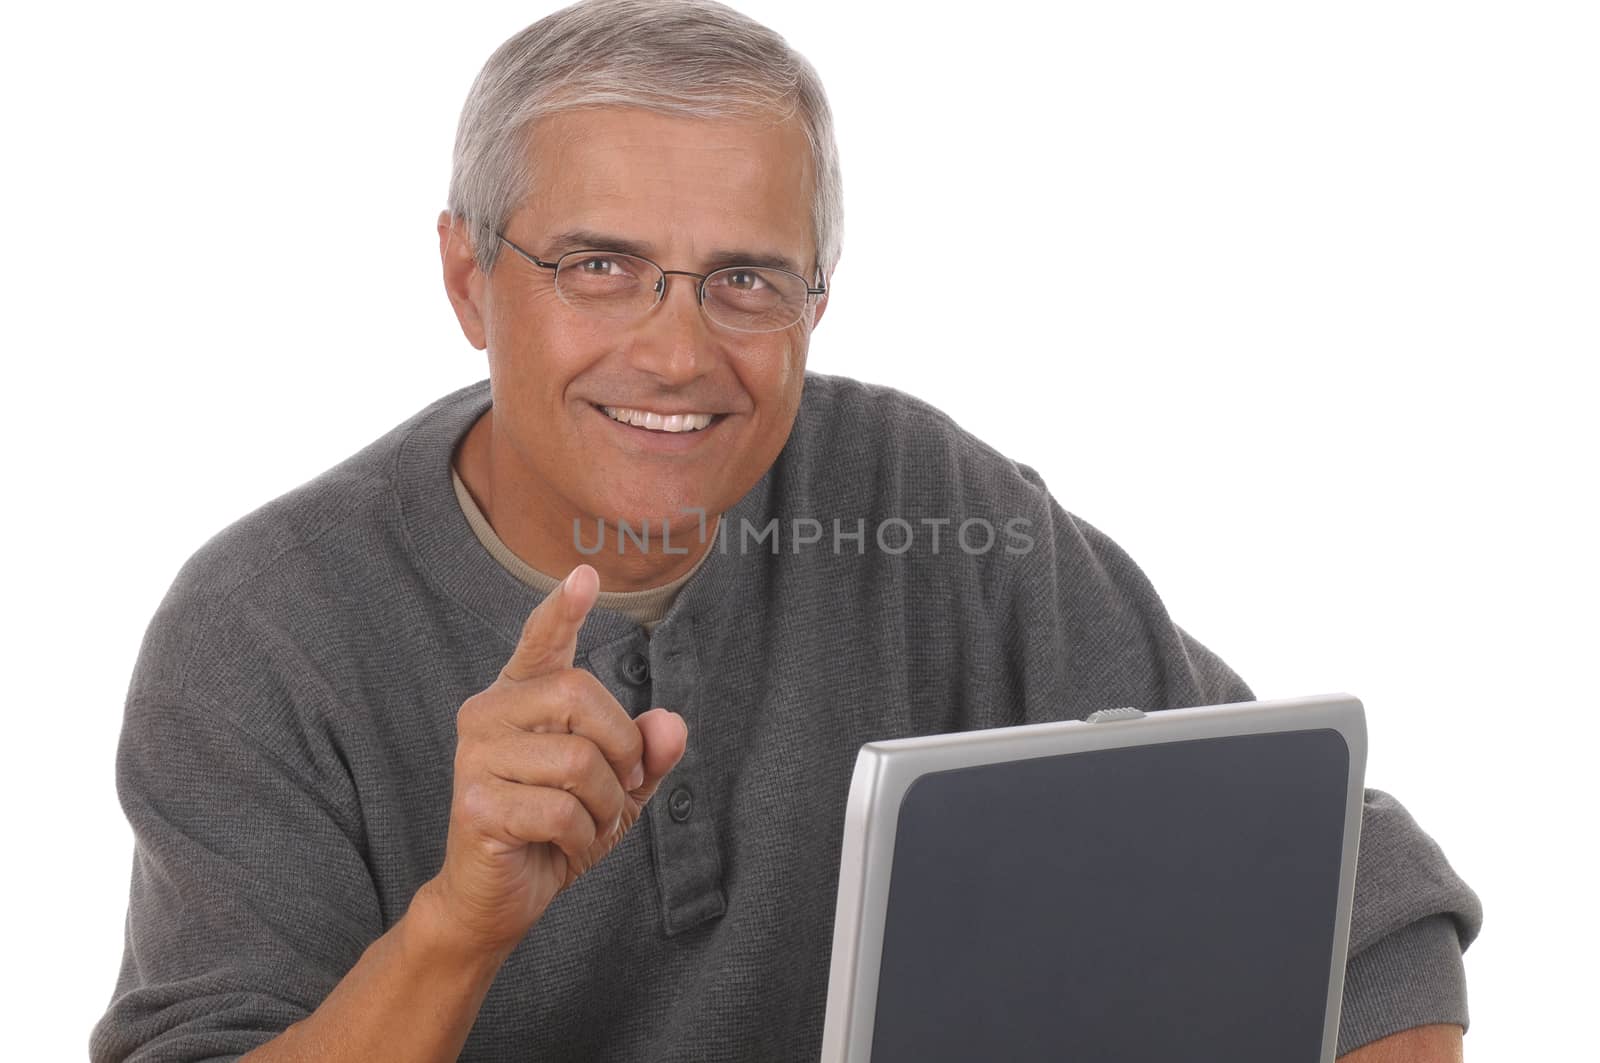 Middle aged man sitting at laptop computer and pointing at camera. Man is smiling and casually dressed. Horizontal format isolated on white.